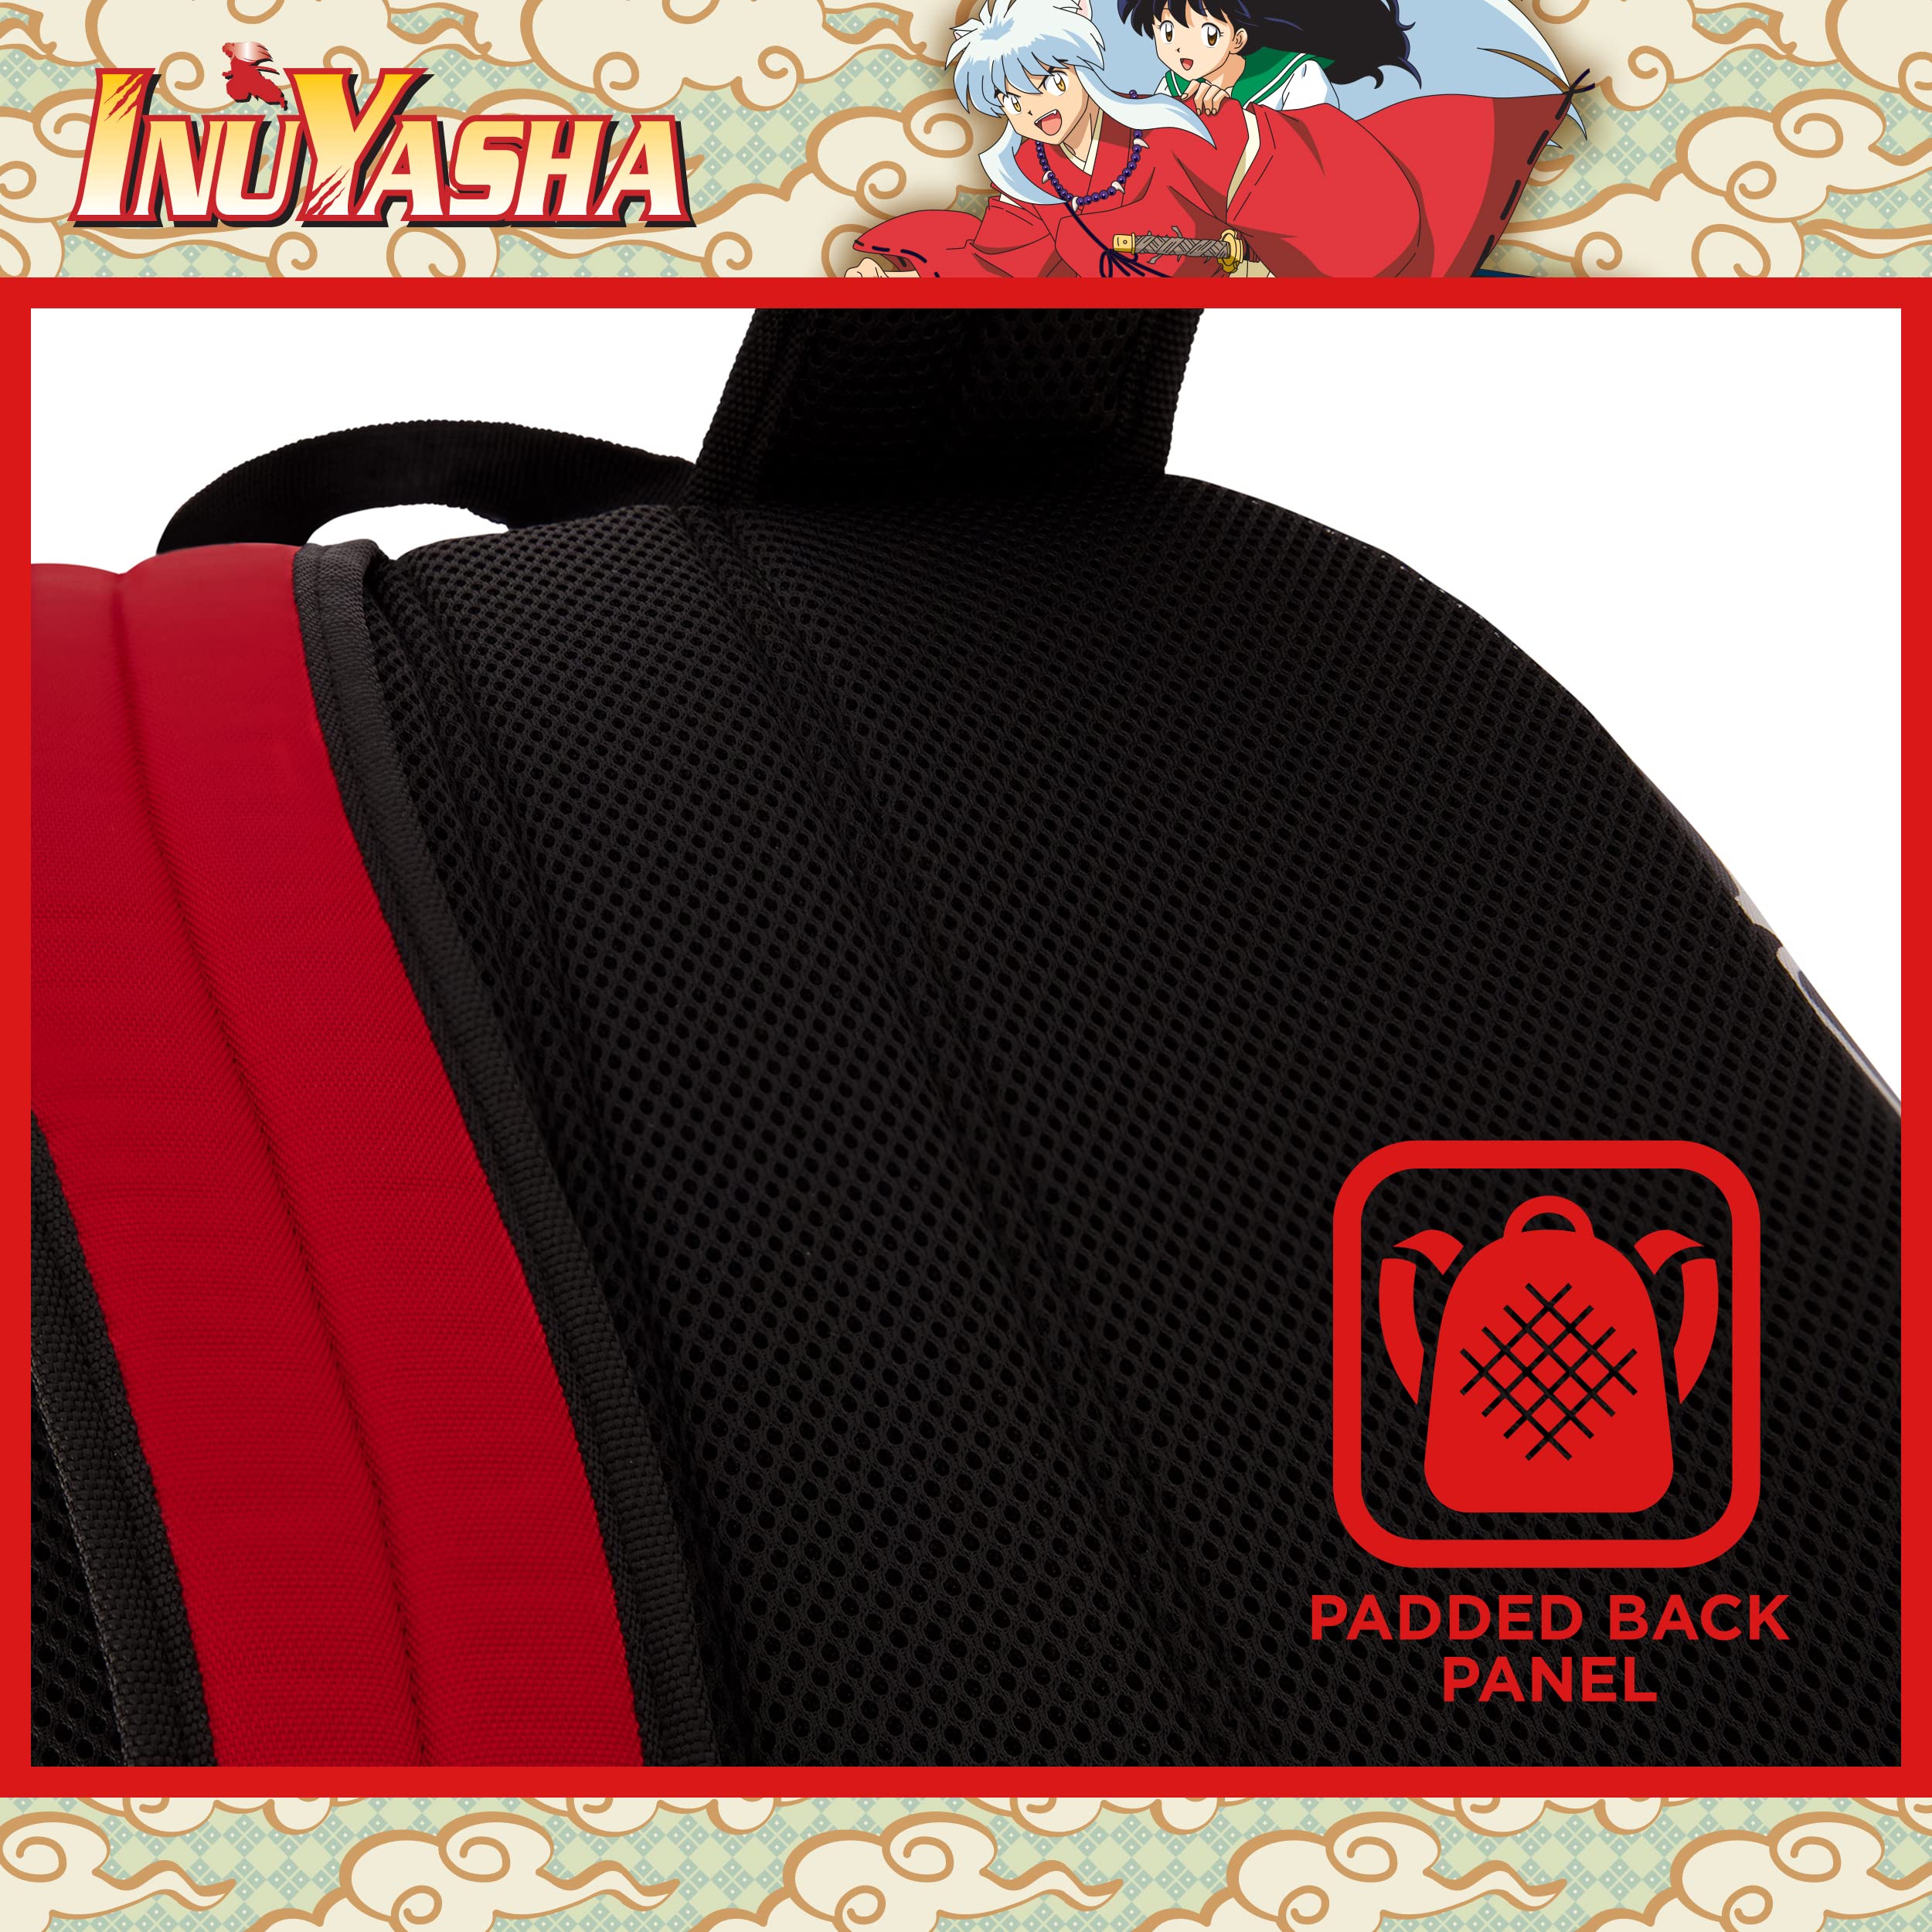 Concept One InuYasha 13 Inch Sleeve Laptop Backpack, Padded Computer Bag for Commute or Travel, Multi